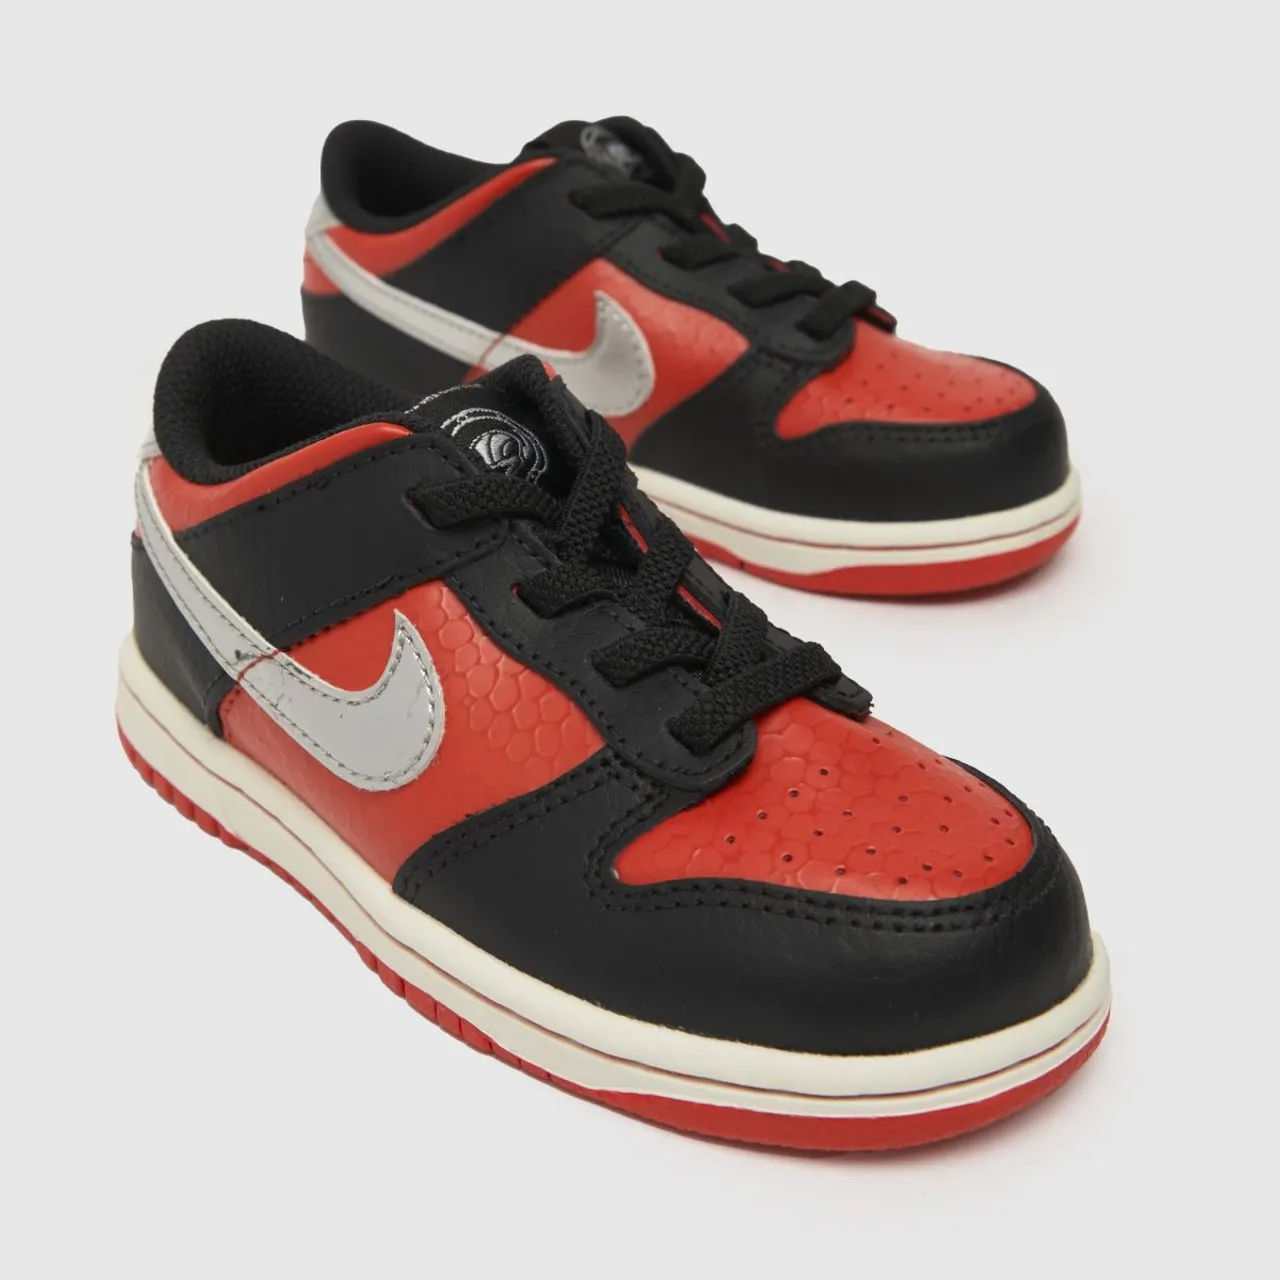 Nike Black & Red Dunk Low Boys Toddler Trainers